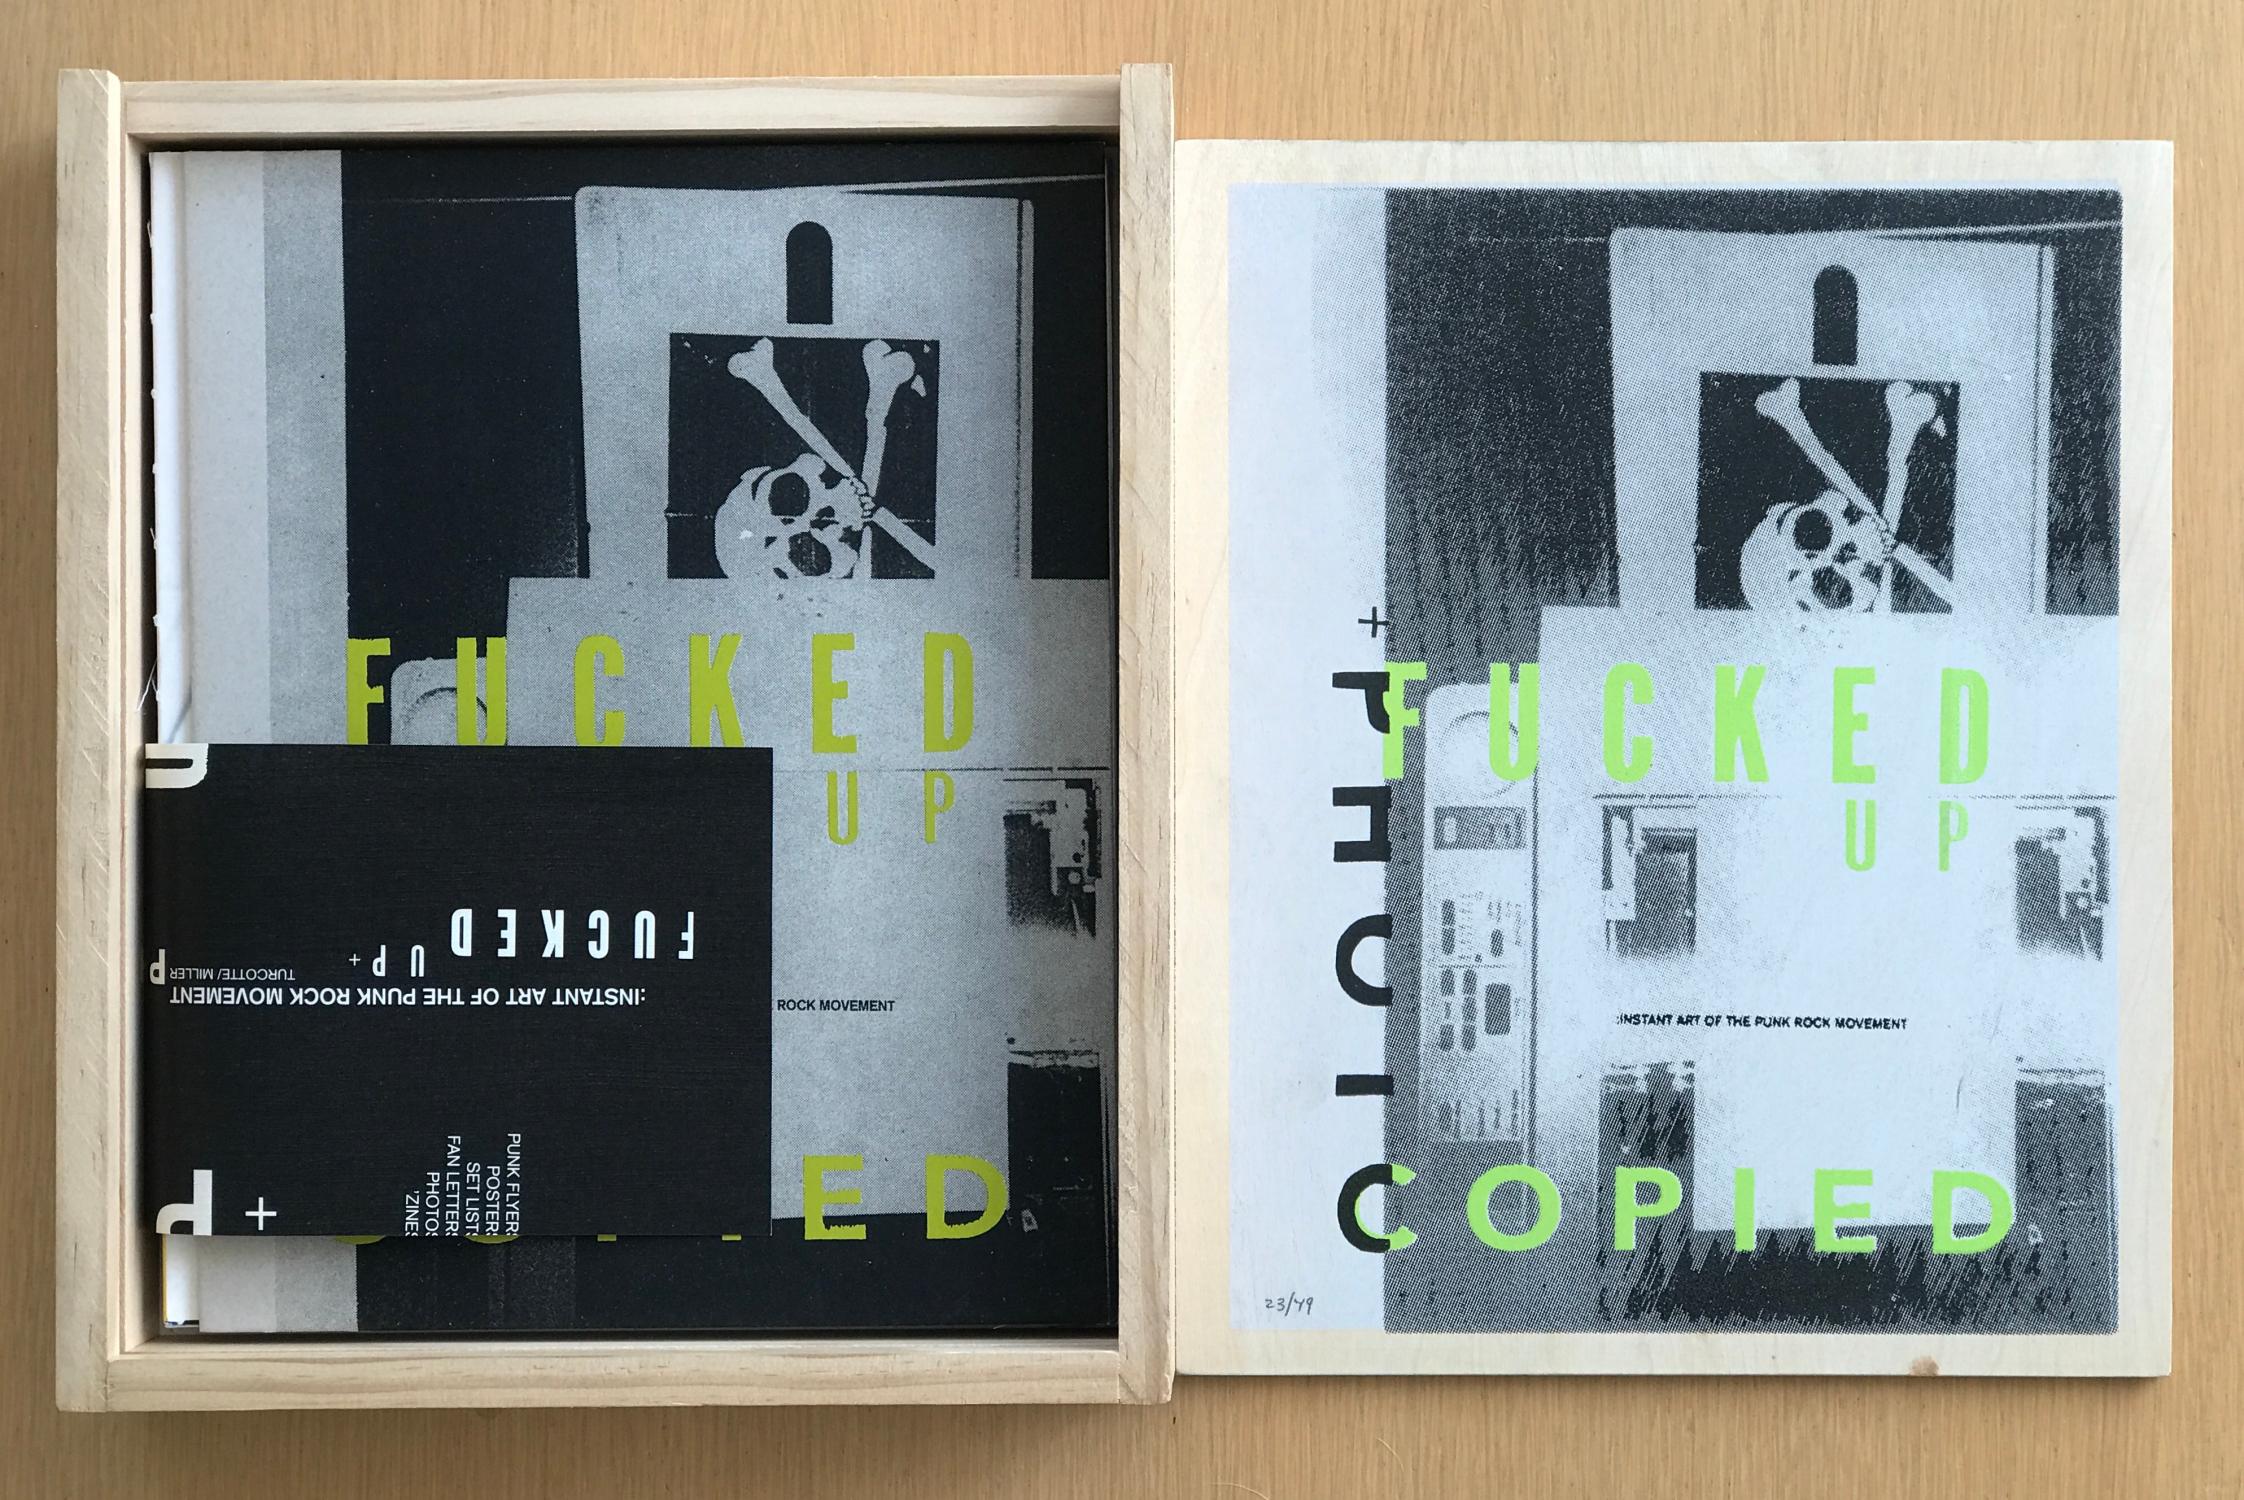 Fucked Up + Photocopied: Instant Art of the Punk Rock Movement